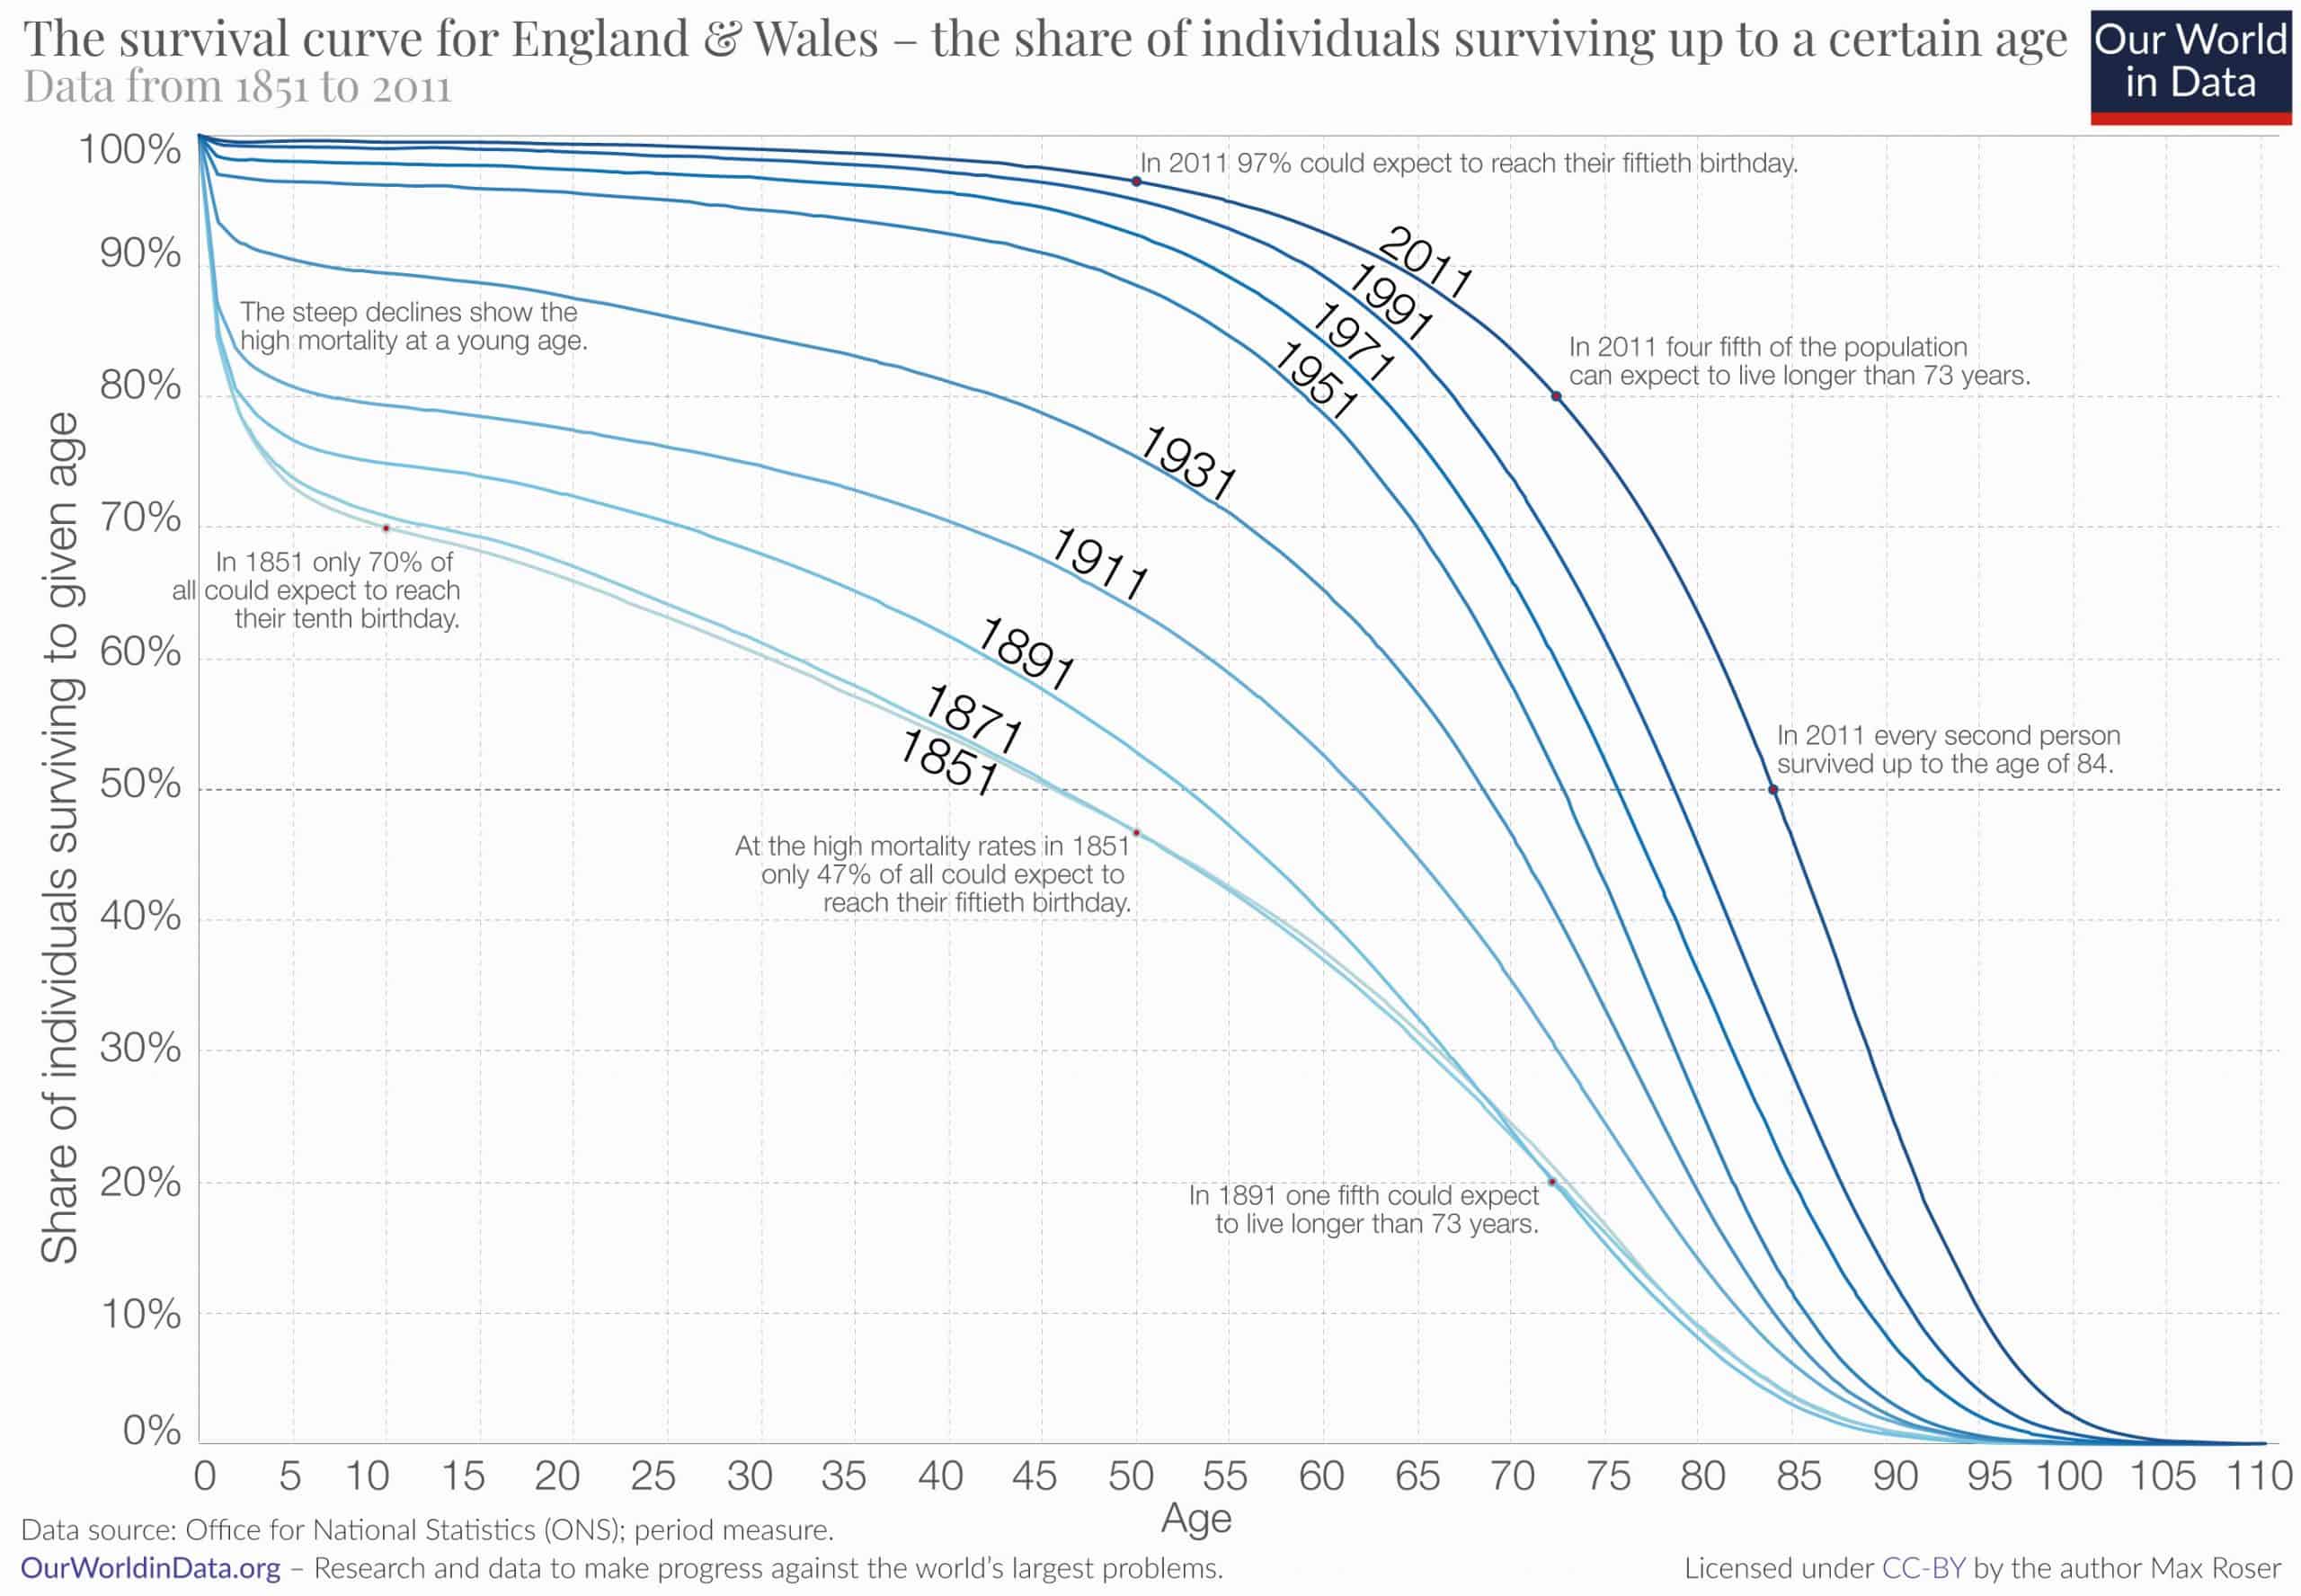 Survival curves for England and Wales, 1851-2011